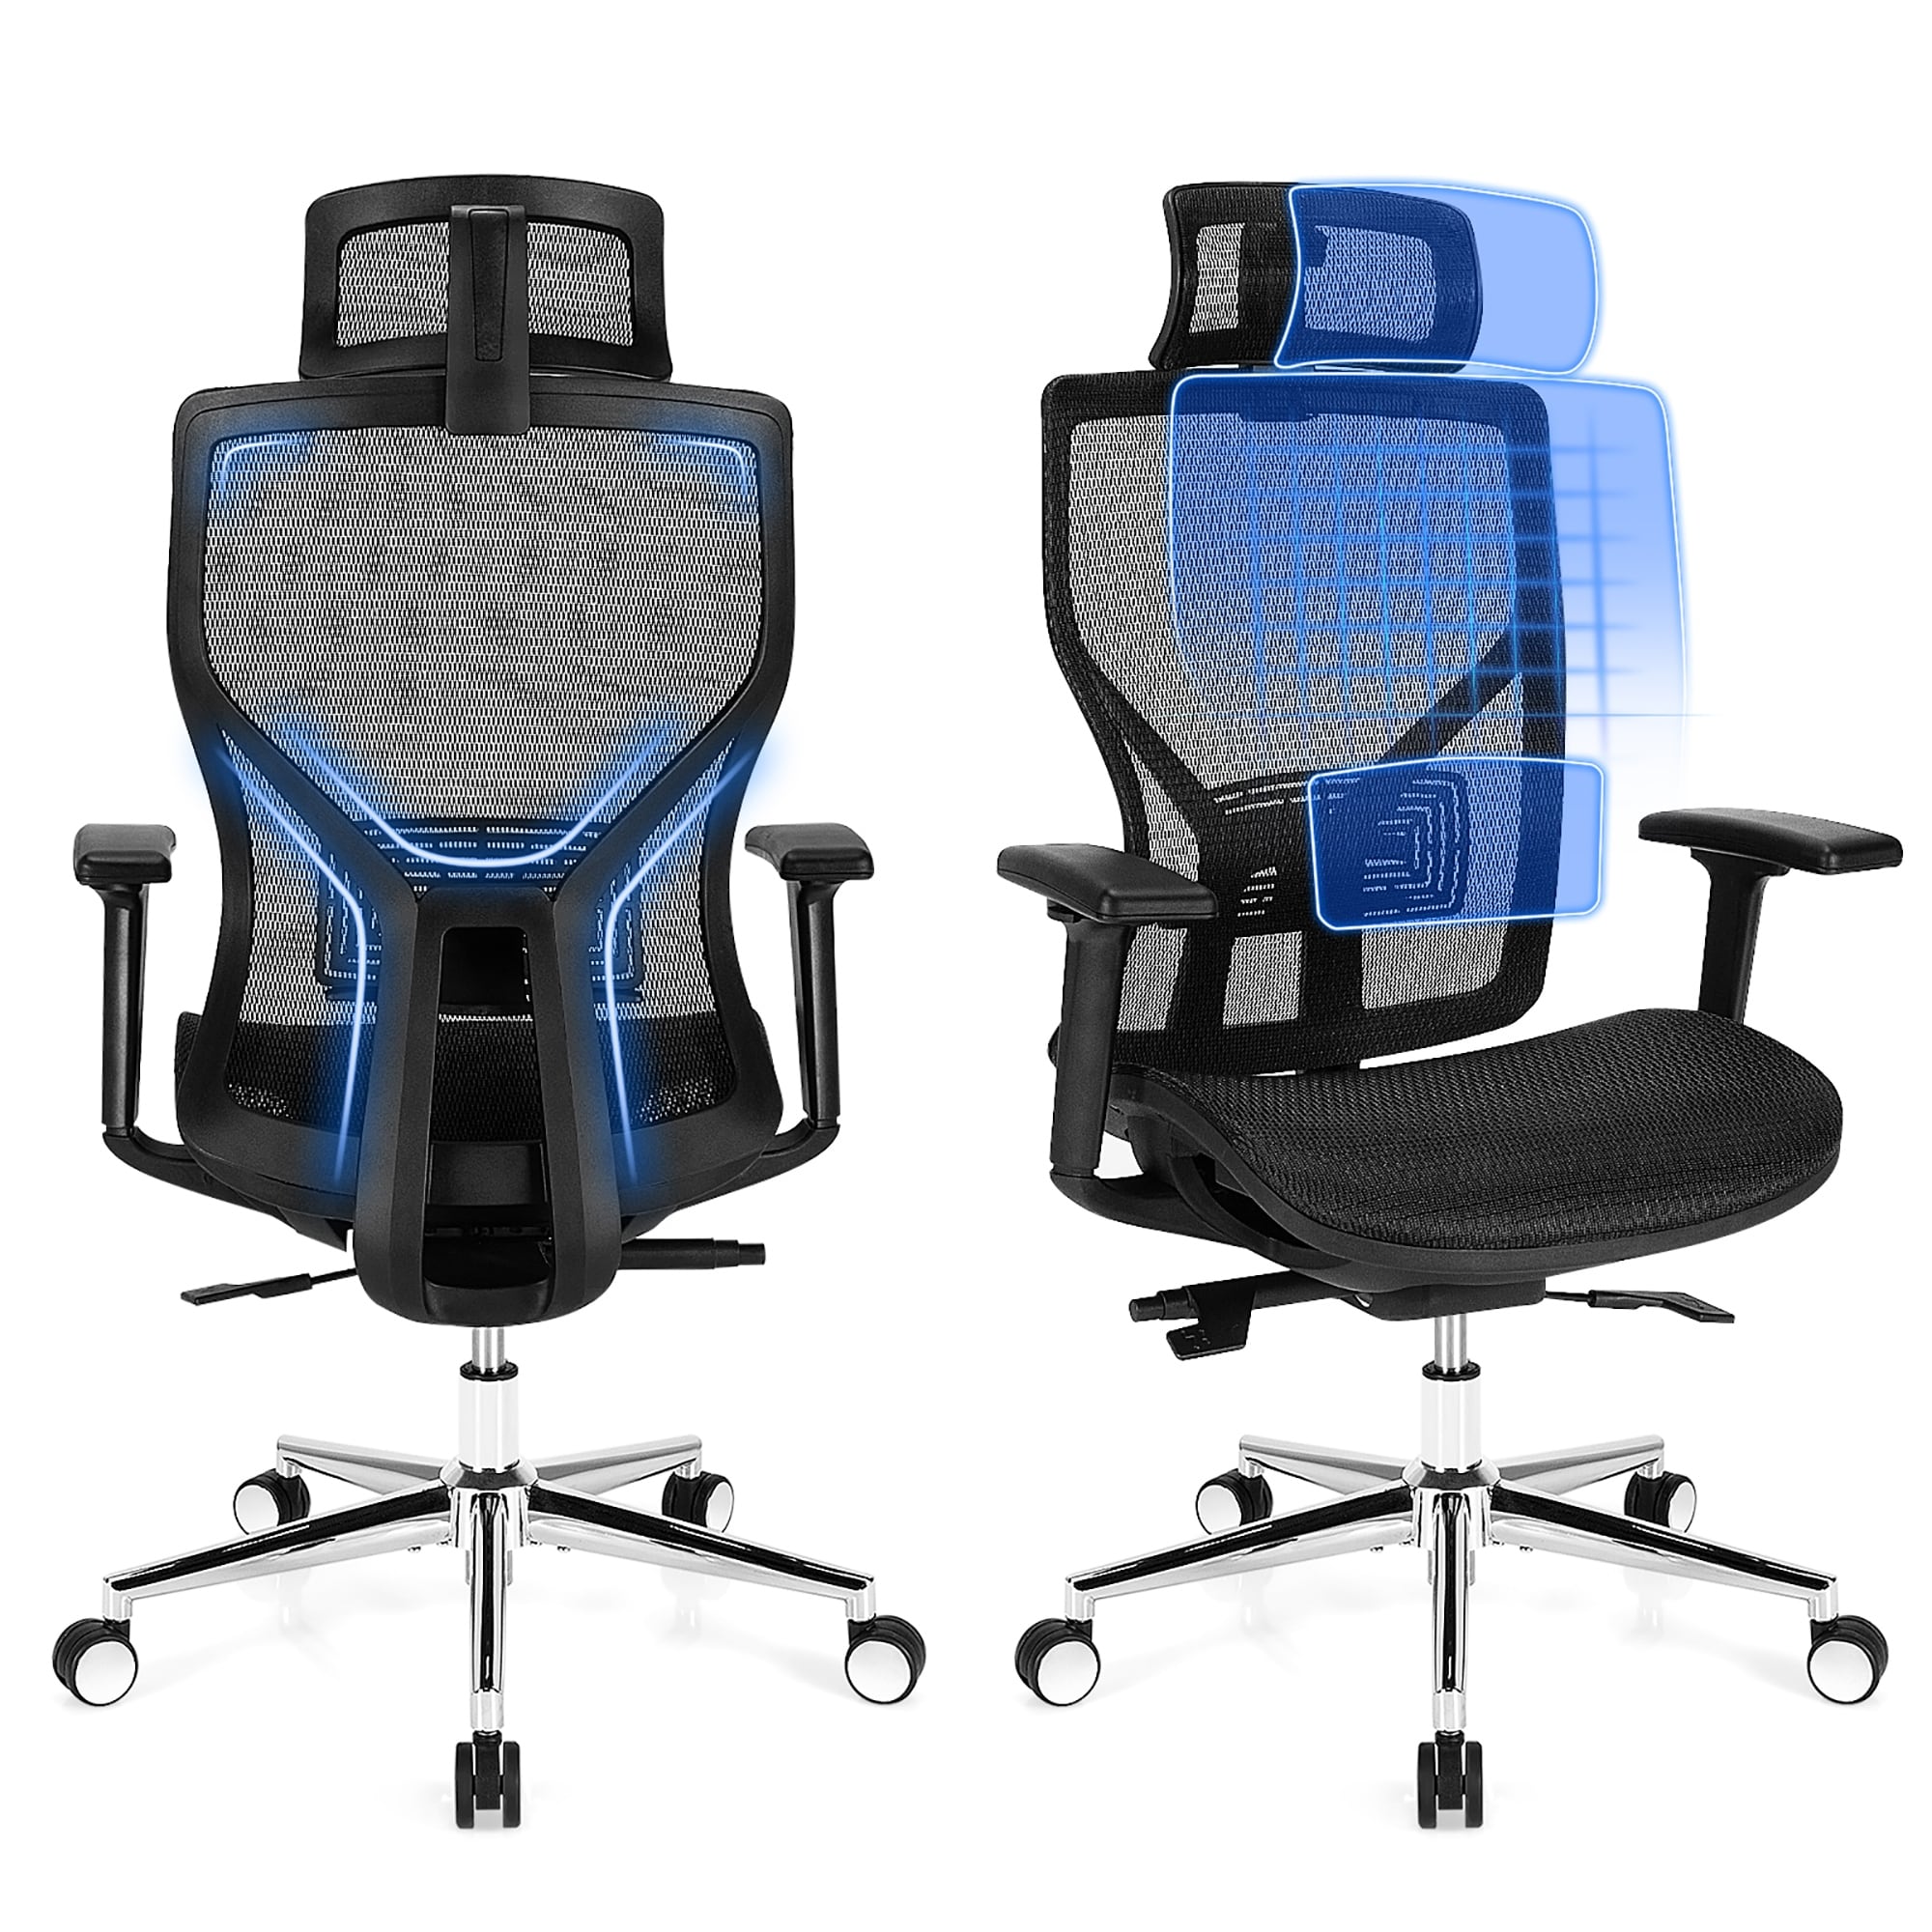 https://ak1.ostkcdn.com/images/products/is/images/direct/106a3350b20904acd41fef594bd3bb832483d943/Costway-Ergonomic-Office-Chair-High-Back-Mesh-Chair-w-Adjustable.jpg